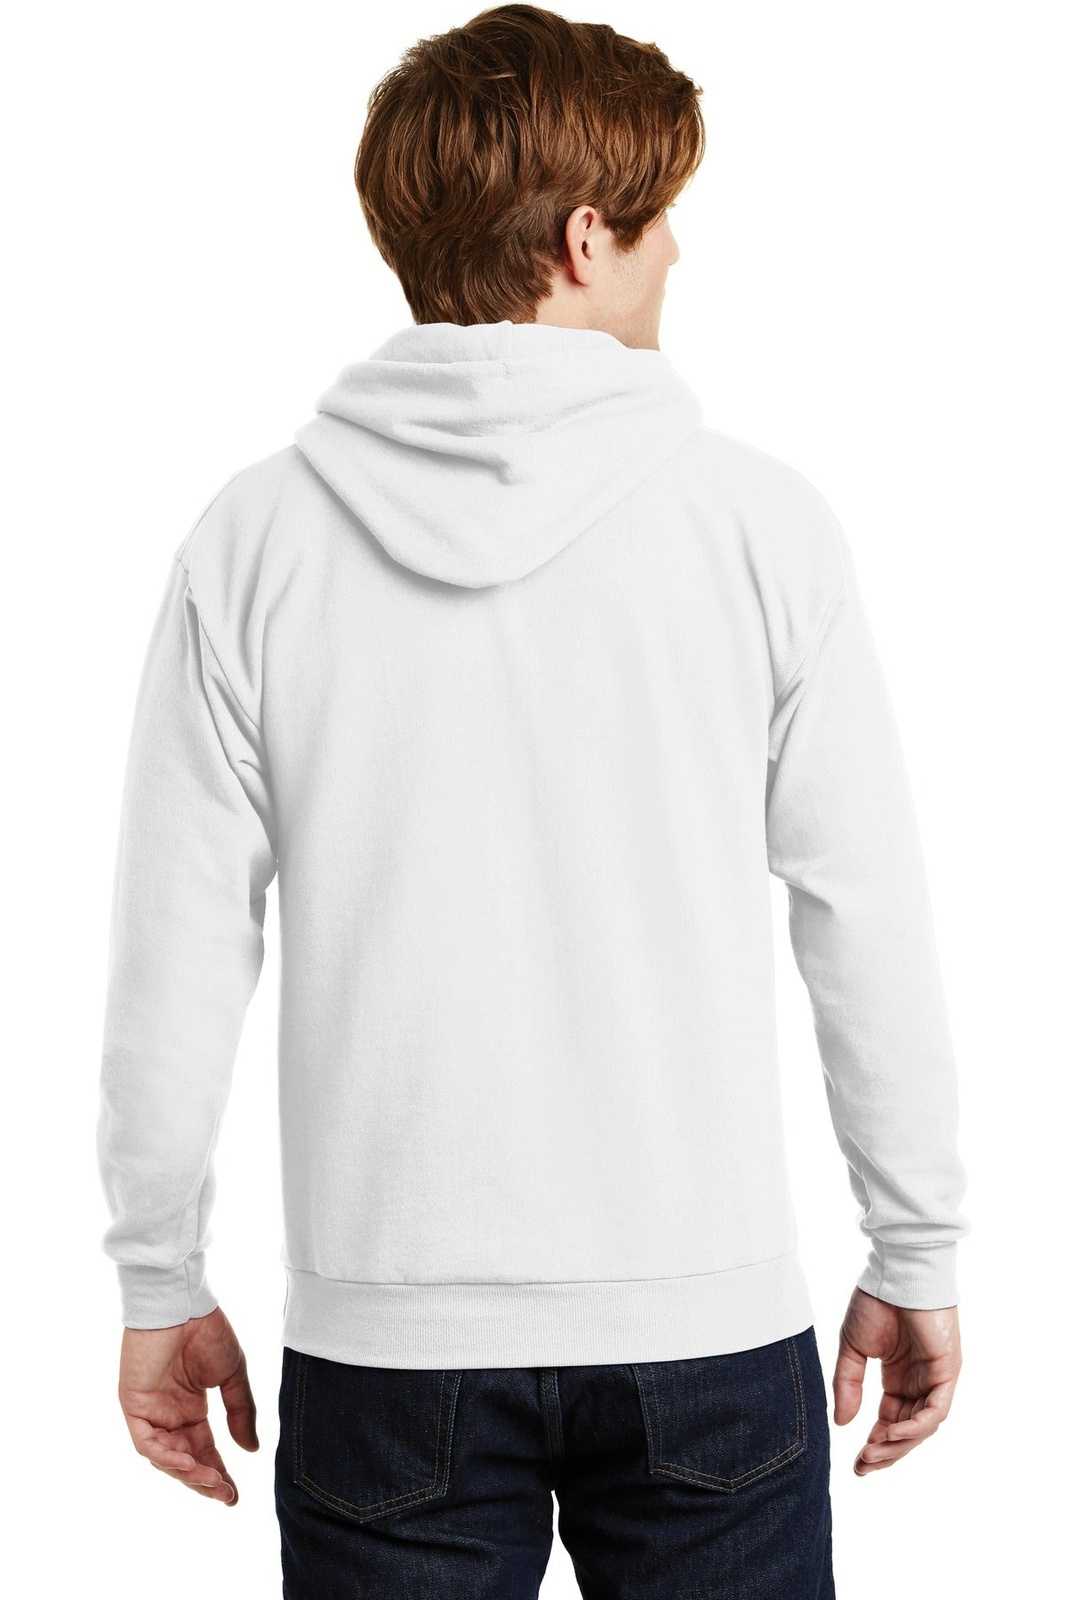 Hanes P170 Ecosmart Pullover Hooded Sweatshirt - White - HIT a Double